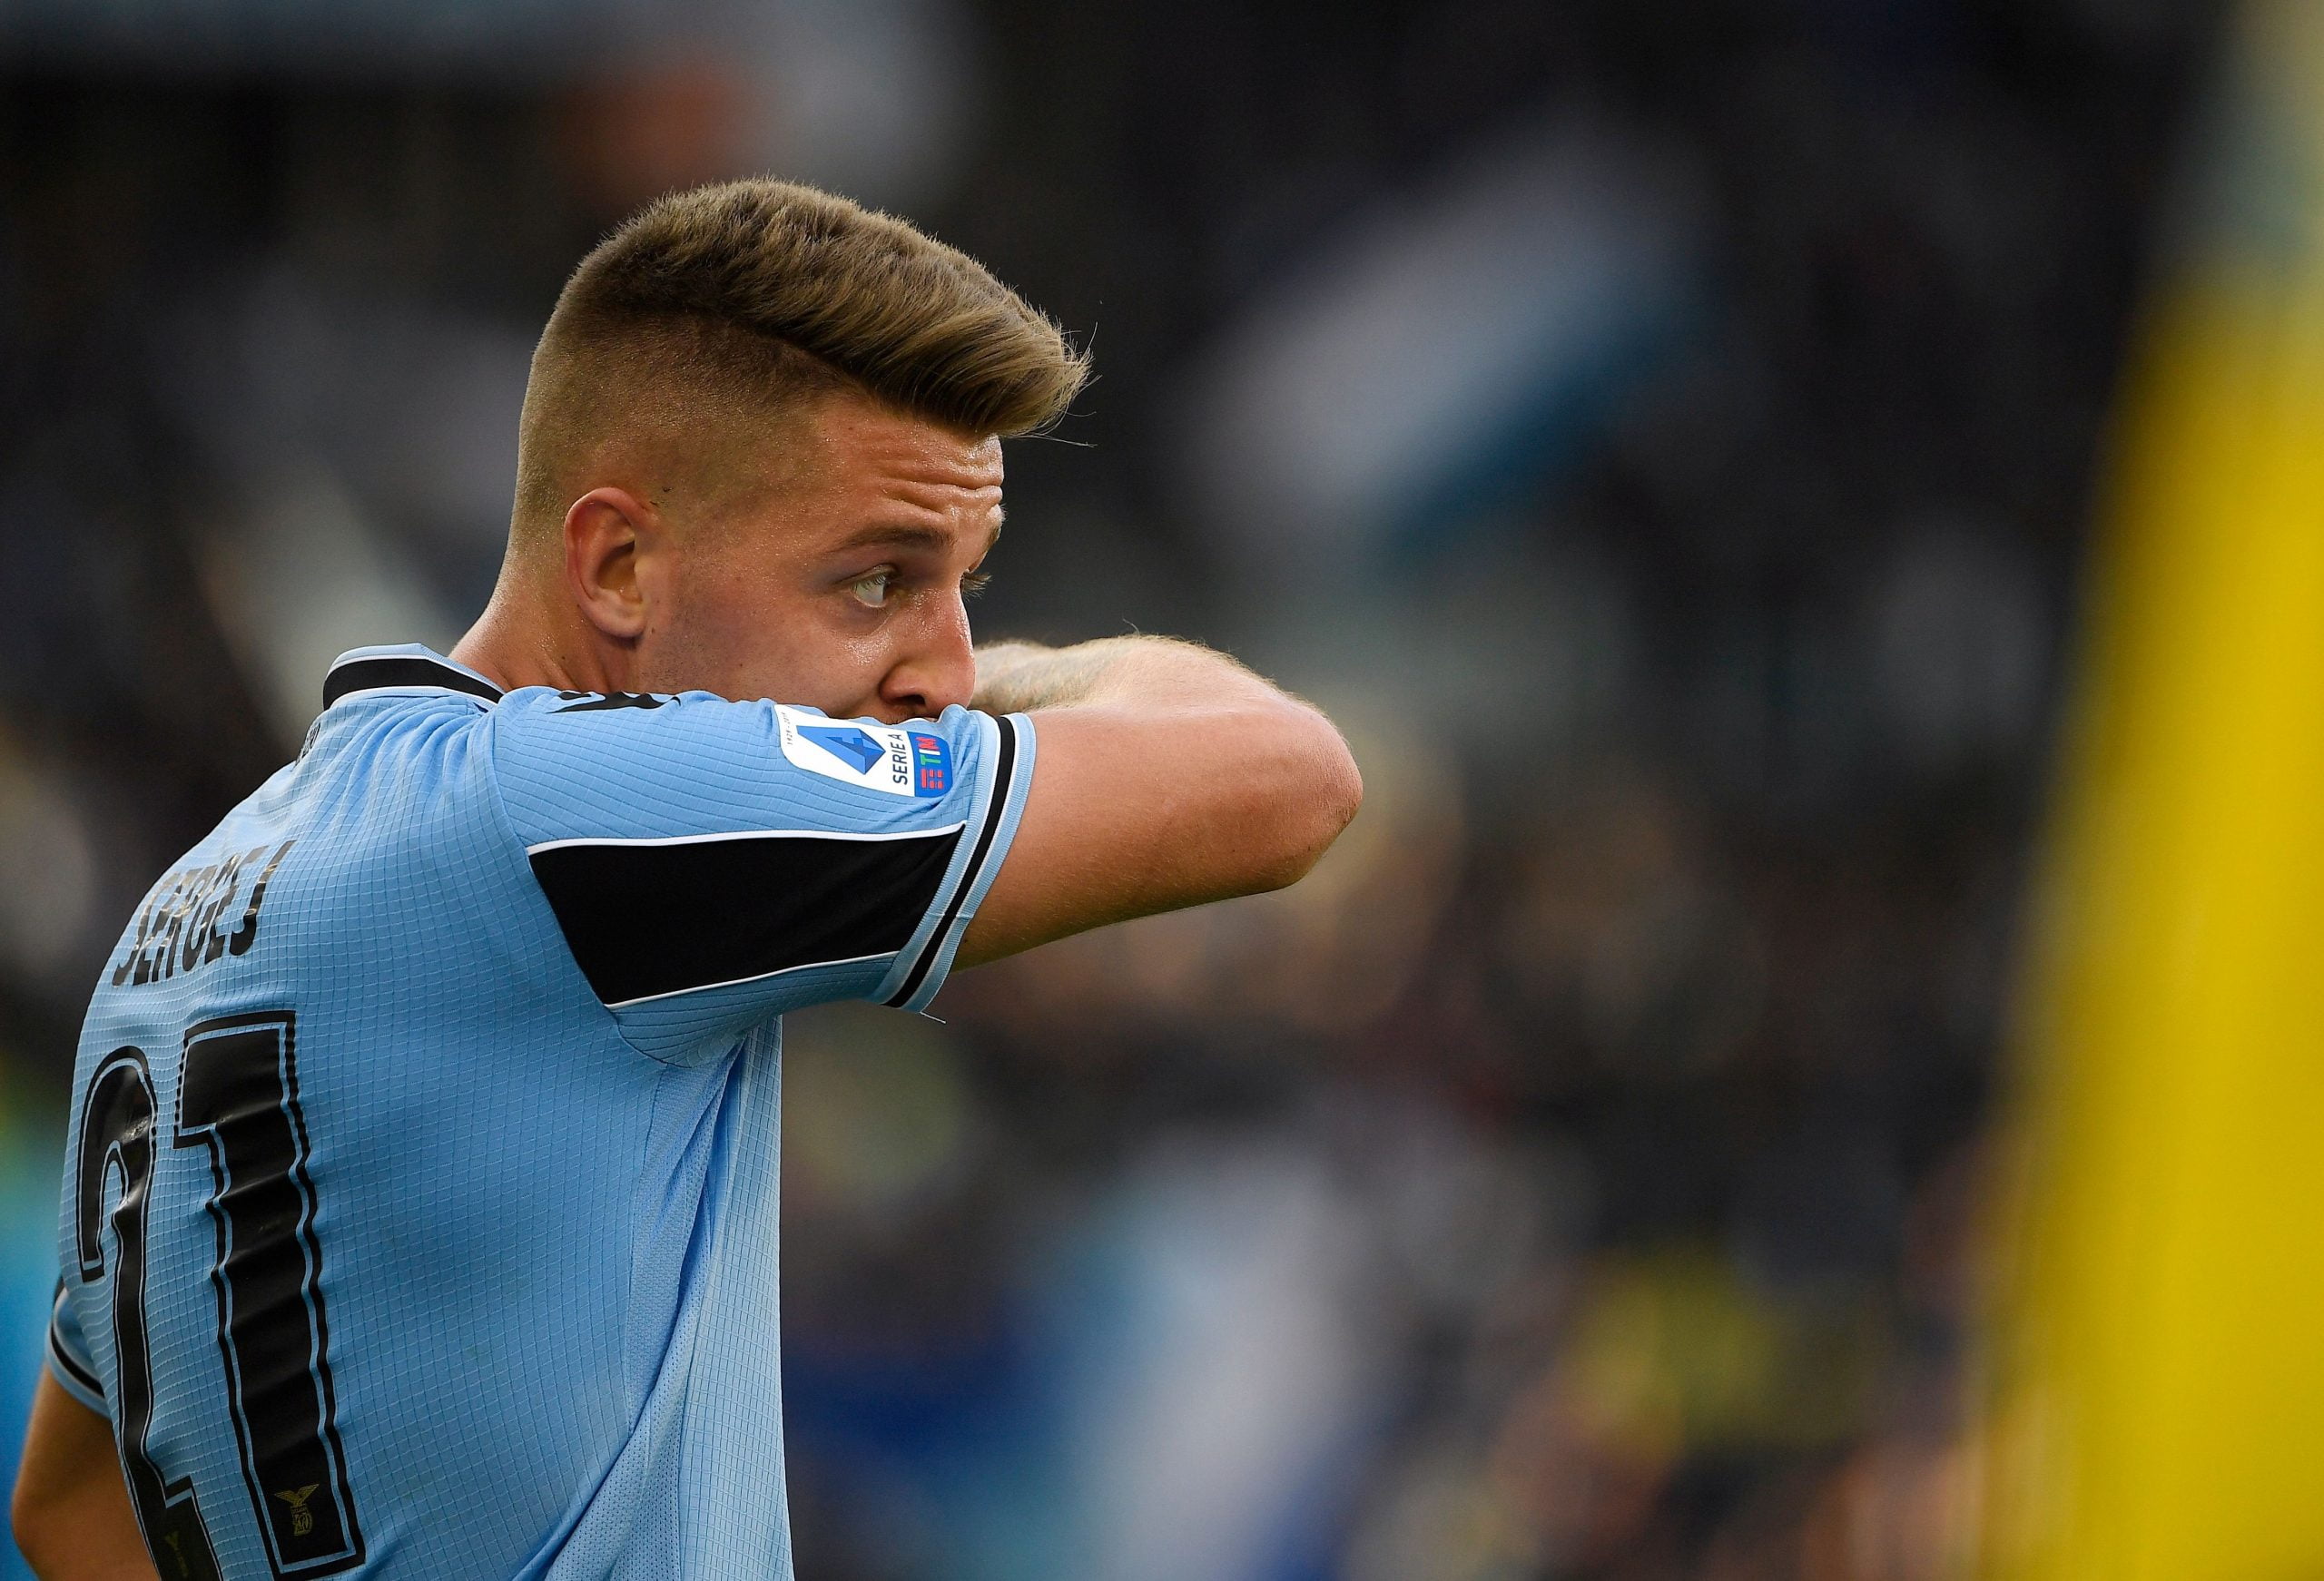 Lazio's midfielder from Serbia Sergej Milinkovic-Savic reacts during the Serie A football match between Lazio and Bologna at the Olympic Stadium in Rome on February 29, 2020. (Photo by Filippo MONTEFORTE / AFP) (Photo by FILIPPO MONTEFORTE/AFP via Getty Images)